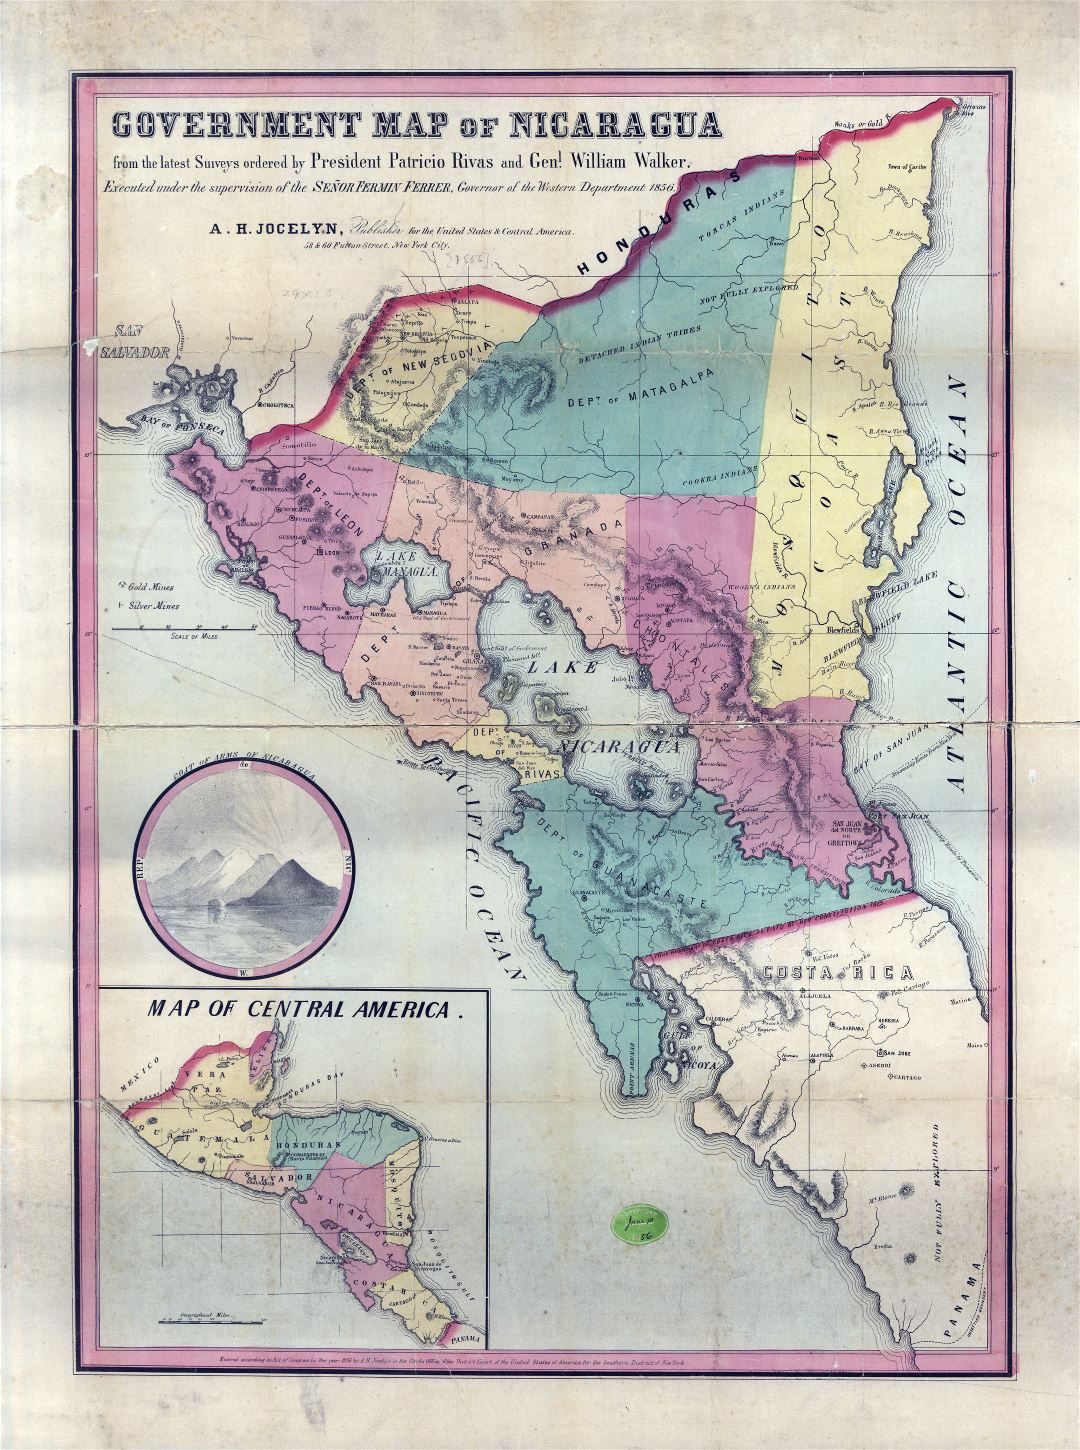 Large scale old government map of Nicaragua - 1856